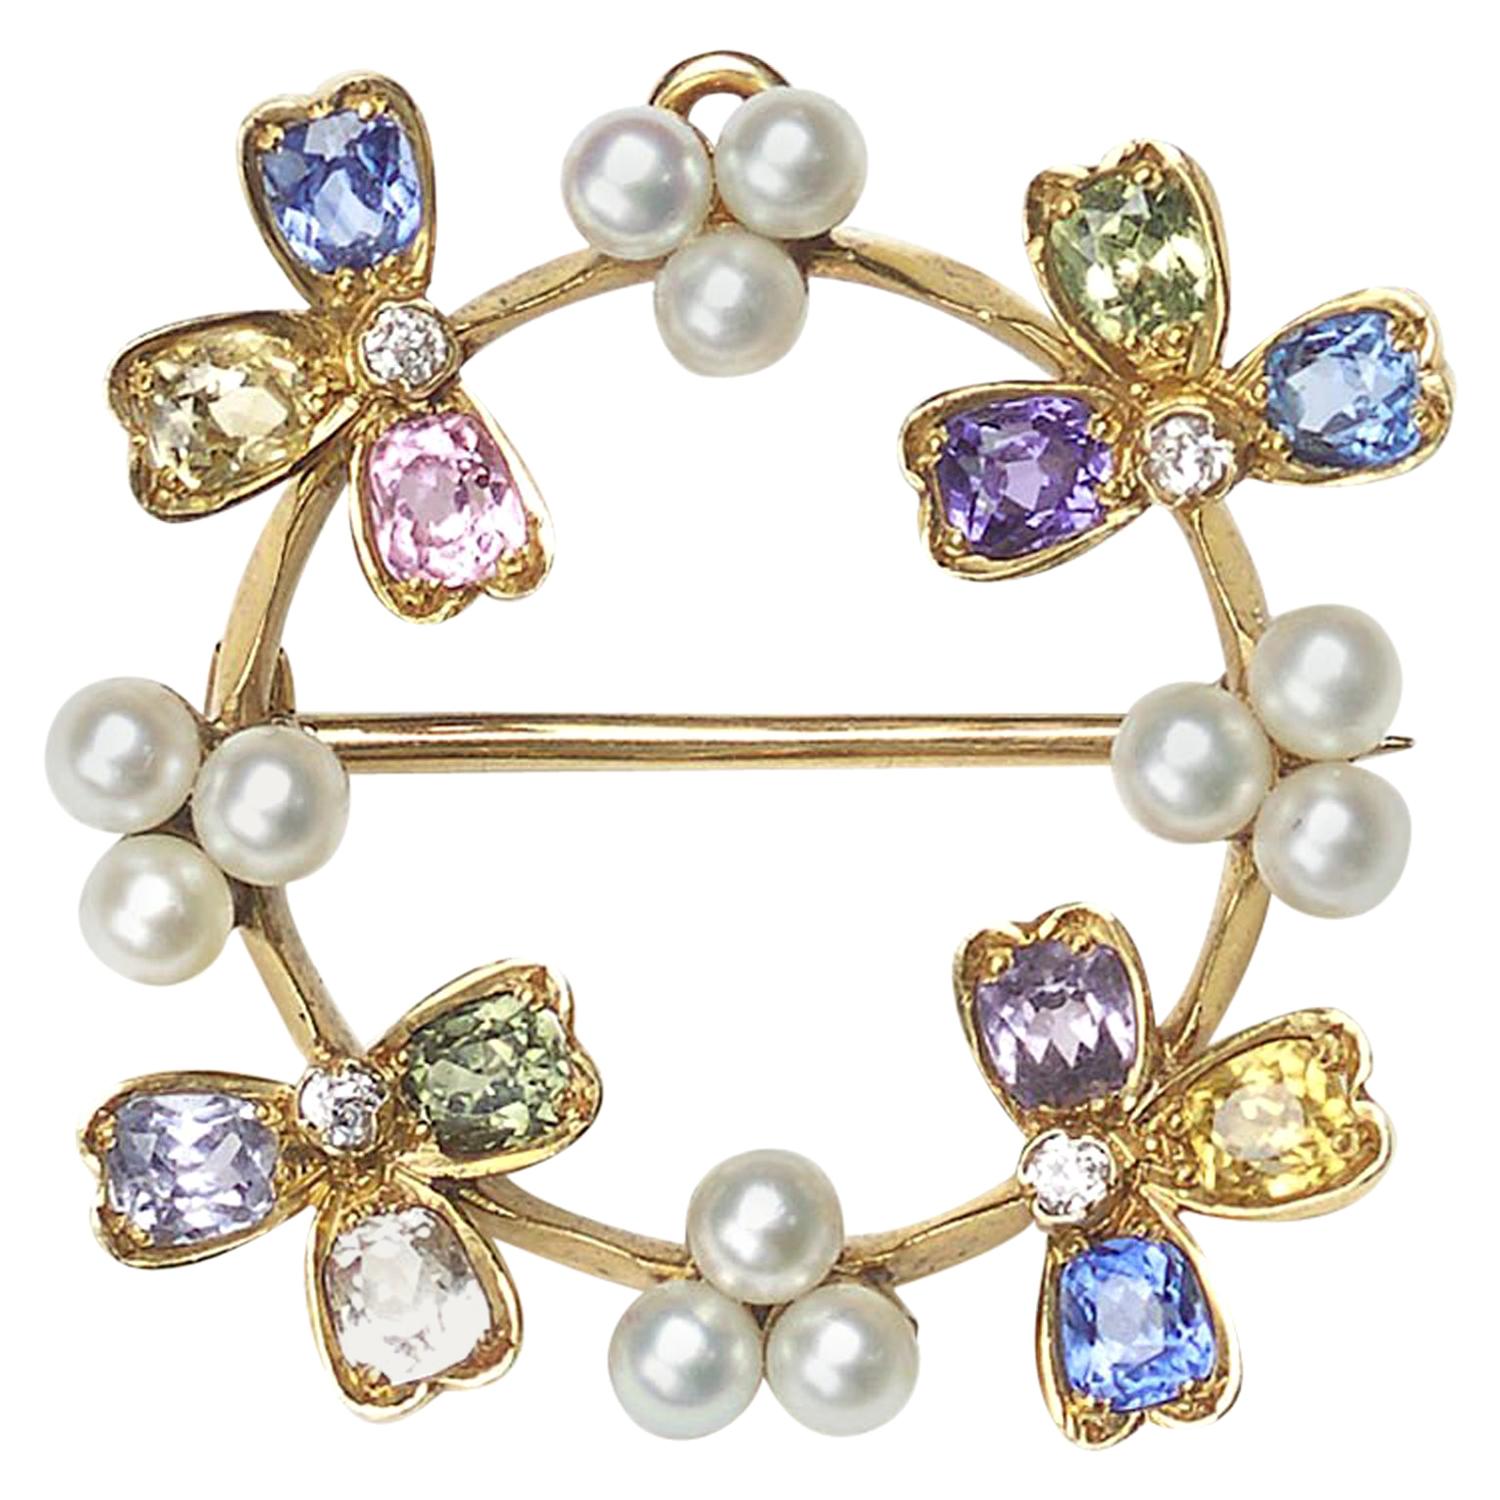 Vintage Tiffany & Co. Gem Set Pearl and Gold Pendant Brooch, circa 1937 For Sale